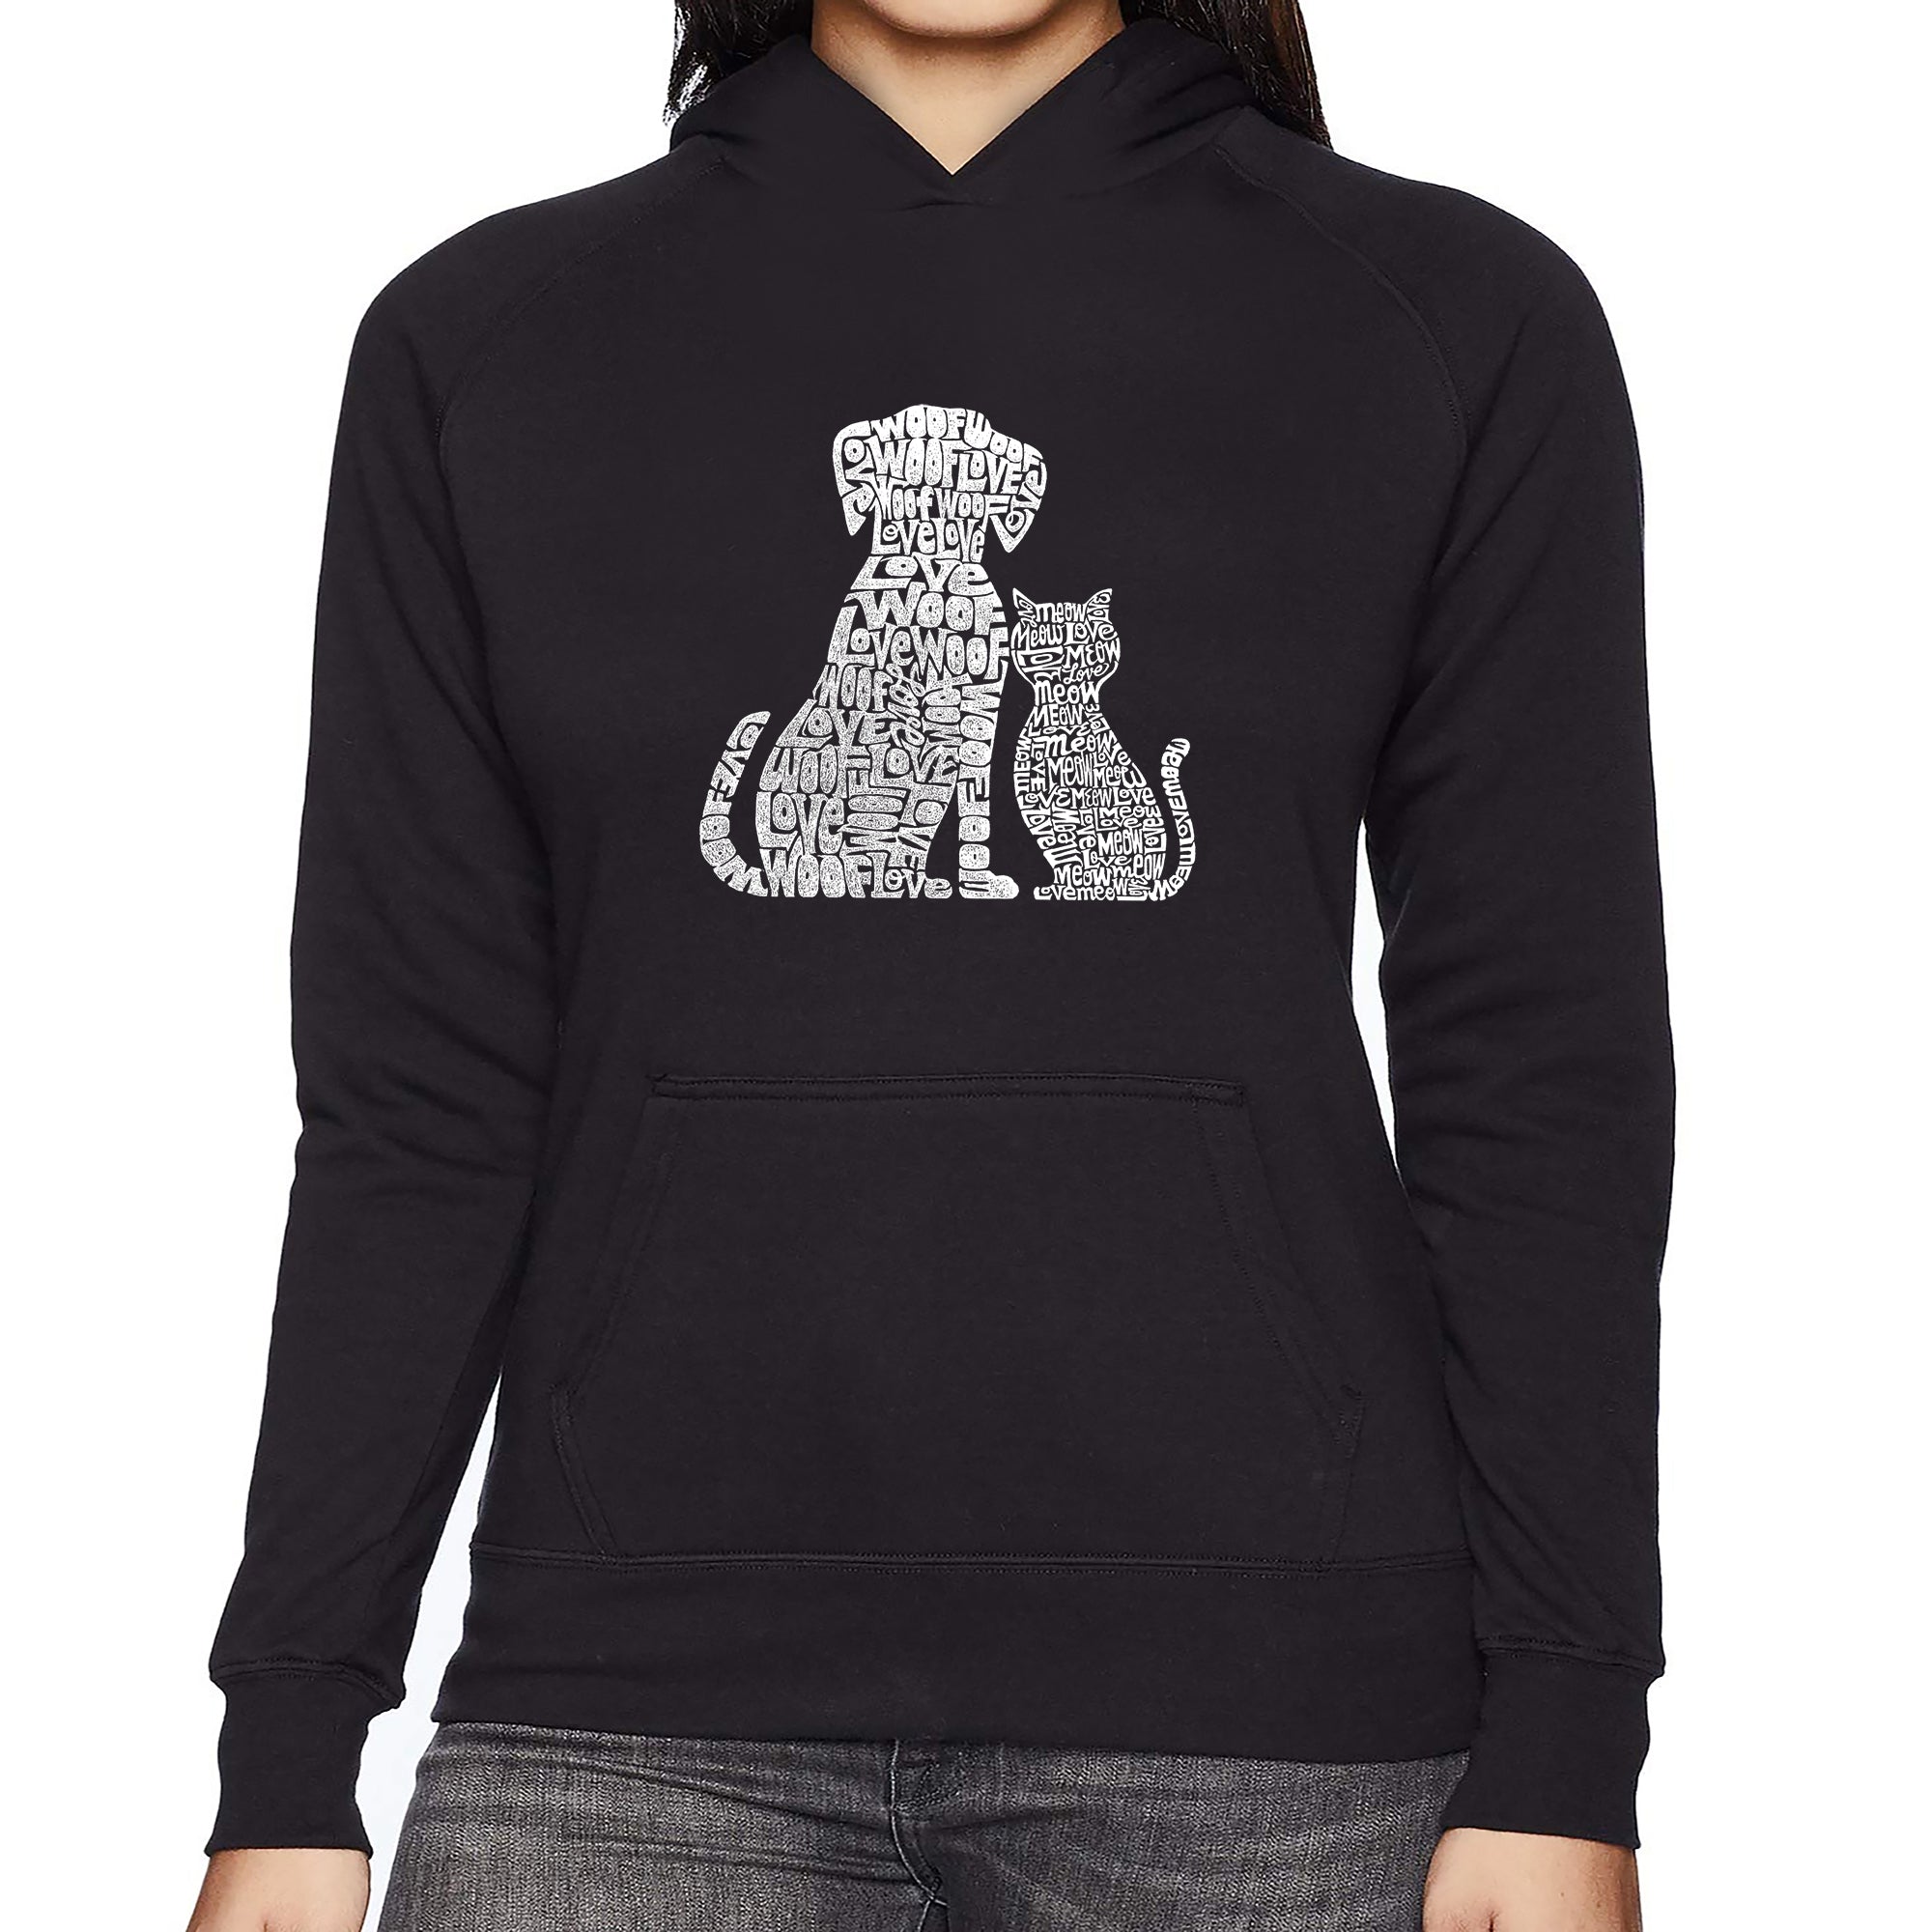 Dogs And Cats - Women's Word Art Hooded Sweatshirt - Black - Small